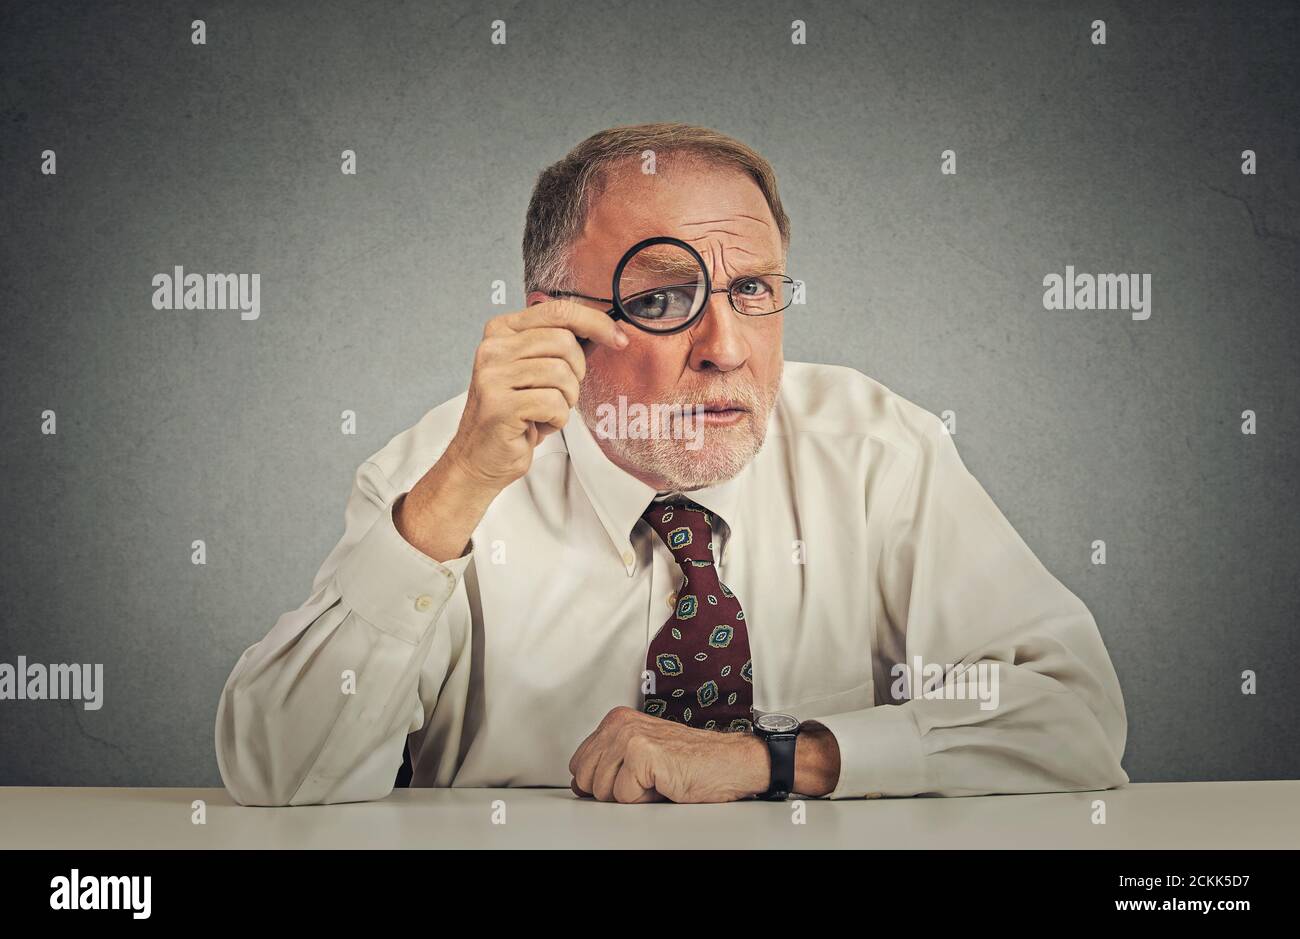 Serious businessman with glasses skeptically looking at you sitting at his office desk isolated on gray wall background. Human face expression, body l Stock Photo